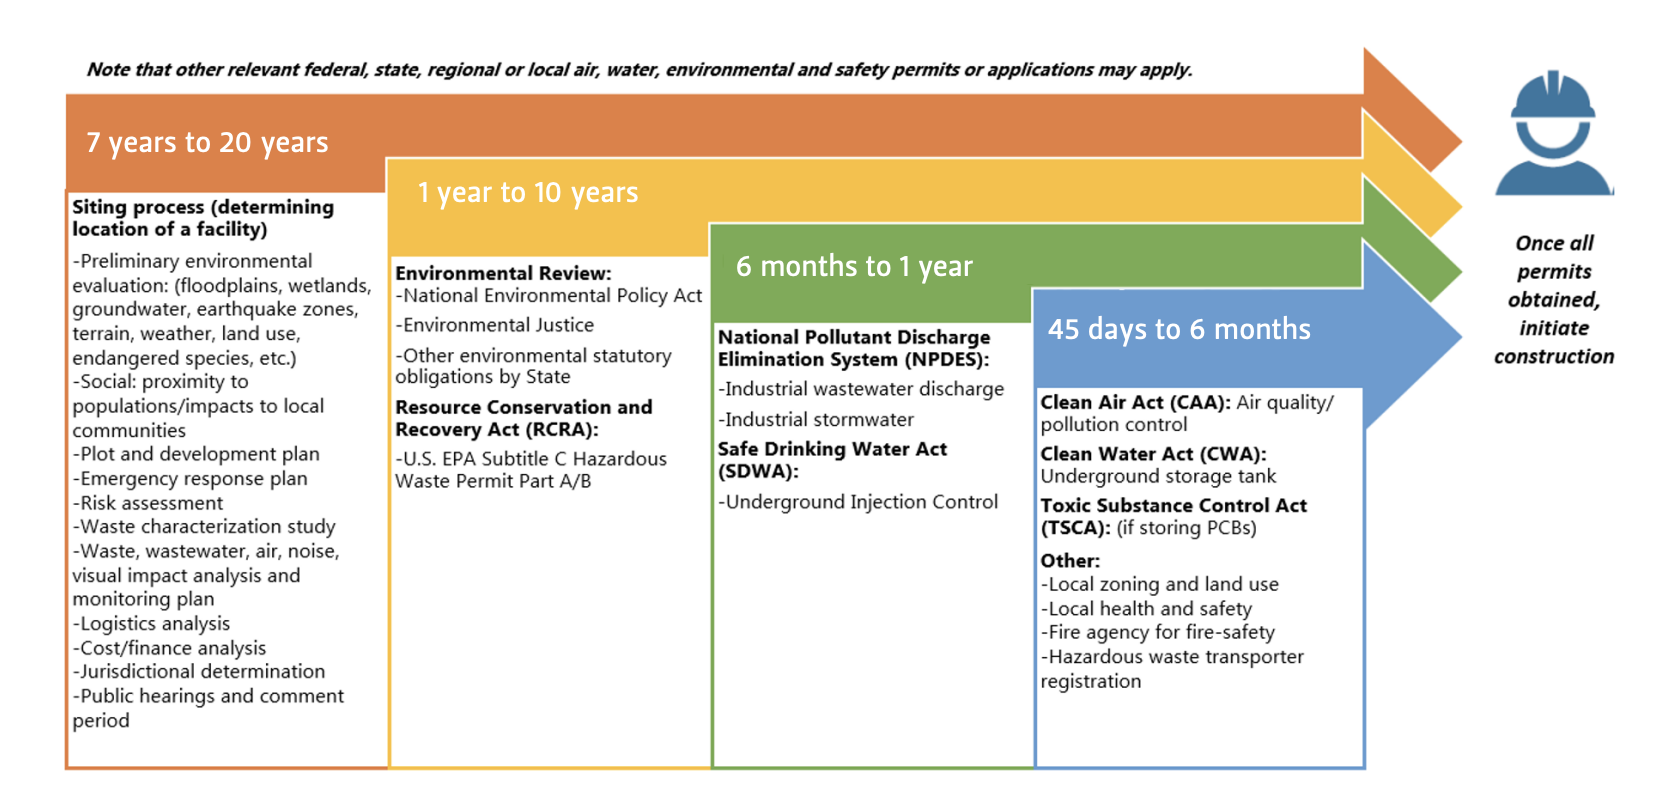 TYPICAL TIMELINE FOR PERMITTING NEW HAZARDOUS WASTE/RECYCLING FACILITIES (BOTTOM)